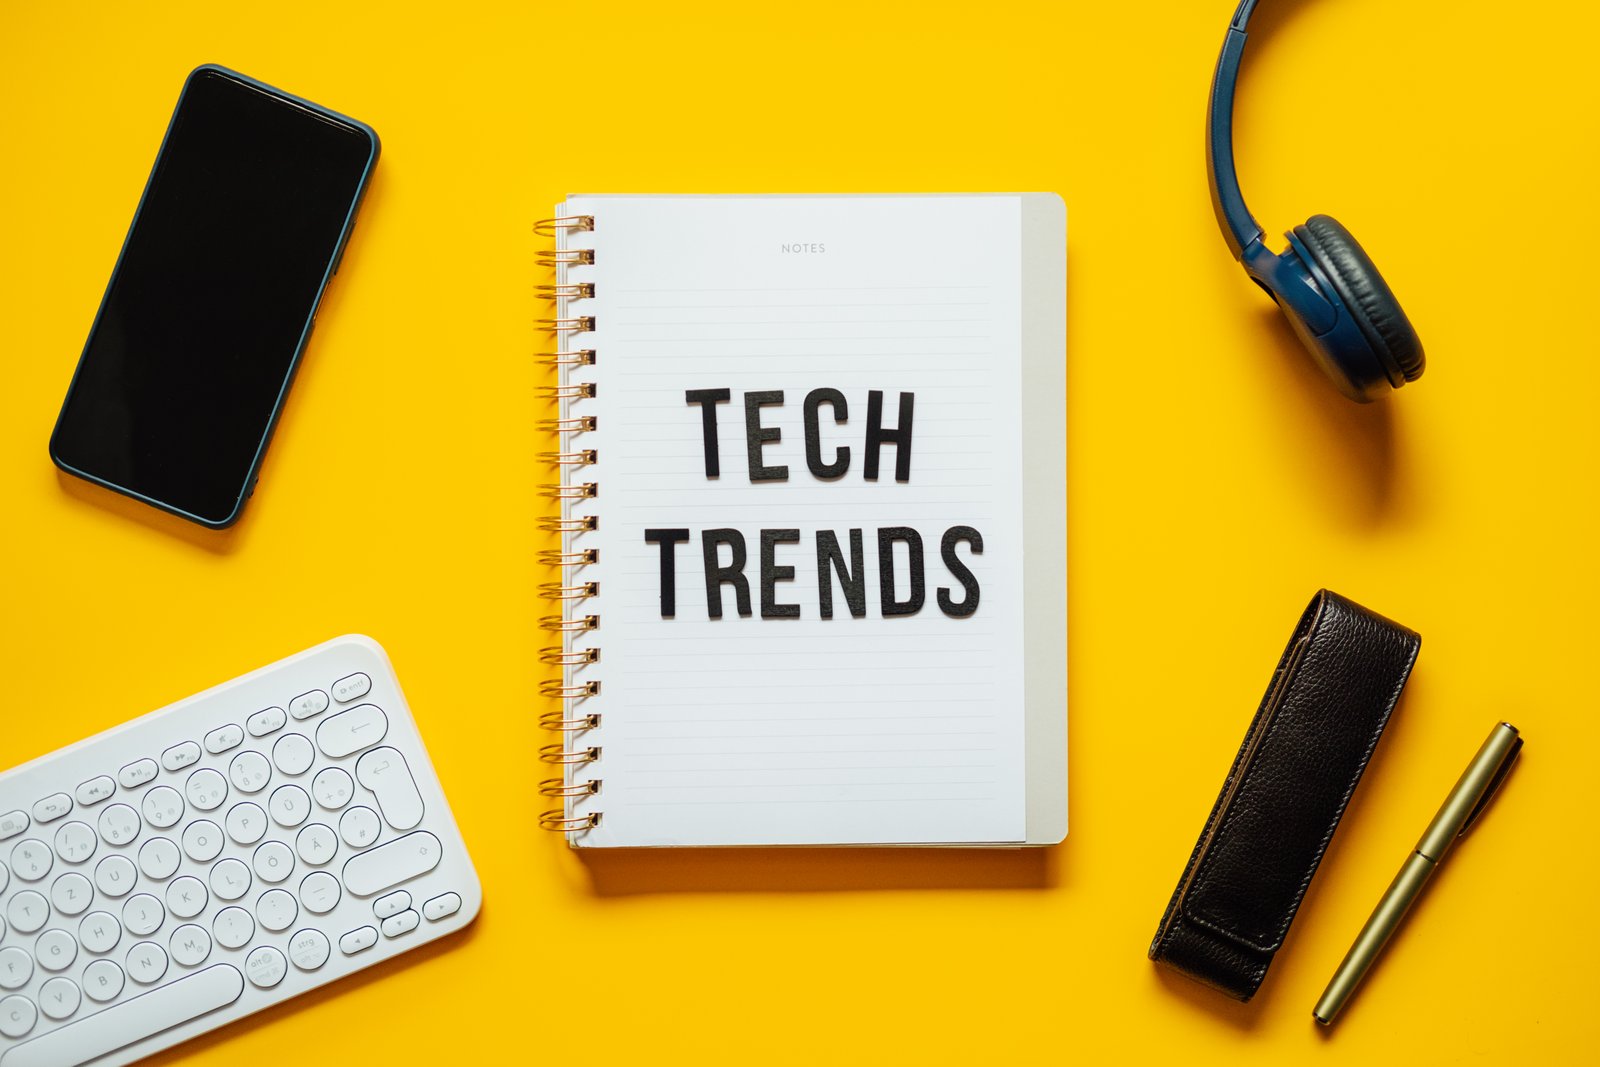 Tech trends, Top New Technology Trends. Word trends on open notepad with different gadgets and